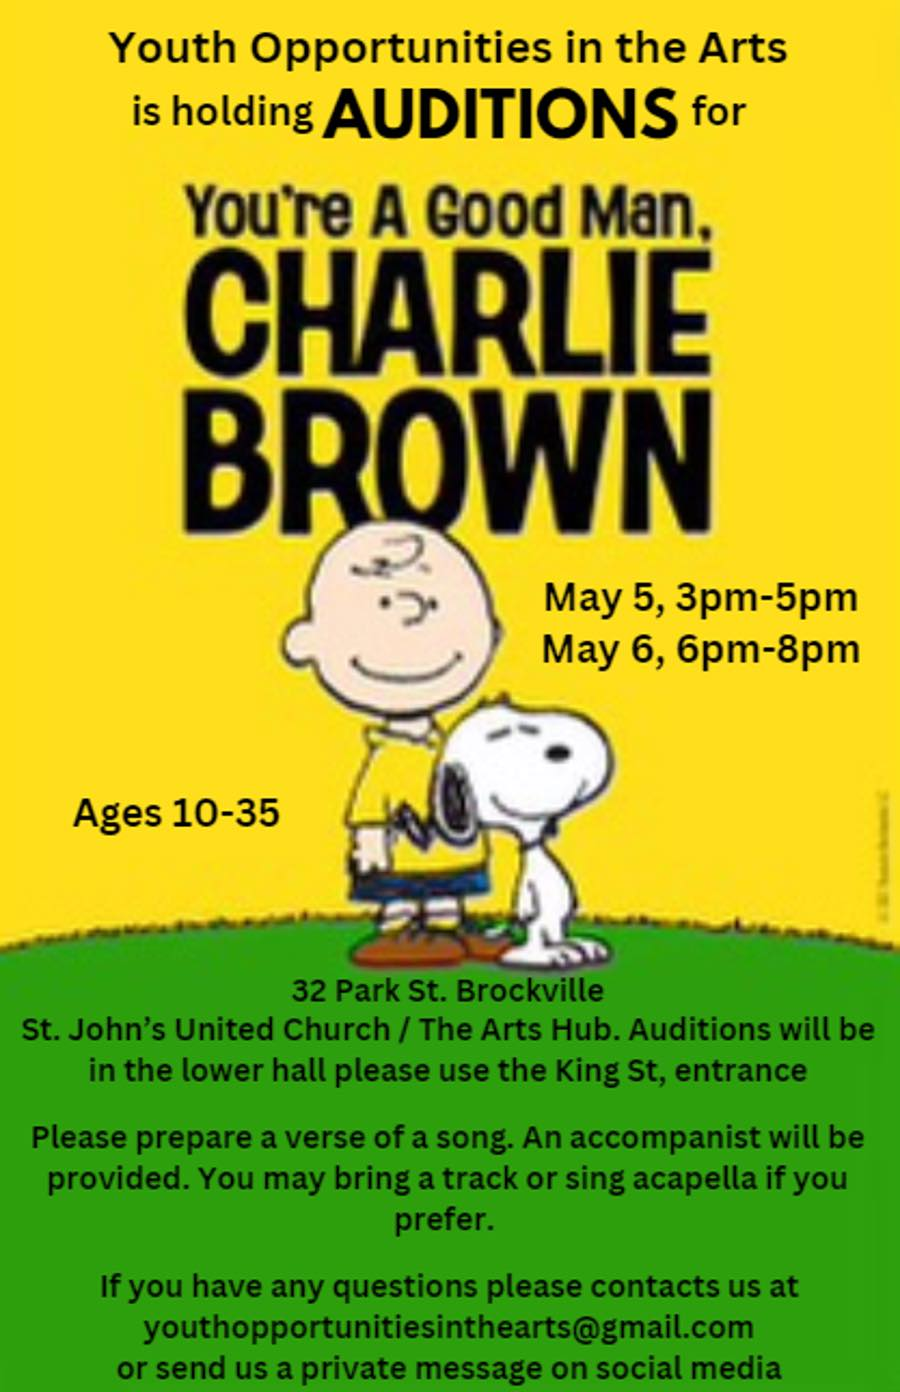 Chris Coyea has details on auditions for "You're A Good Man Charlie Brown"